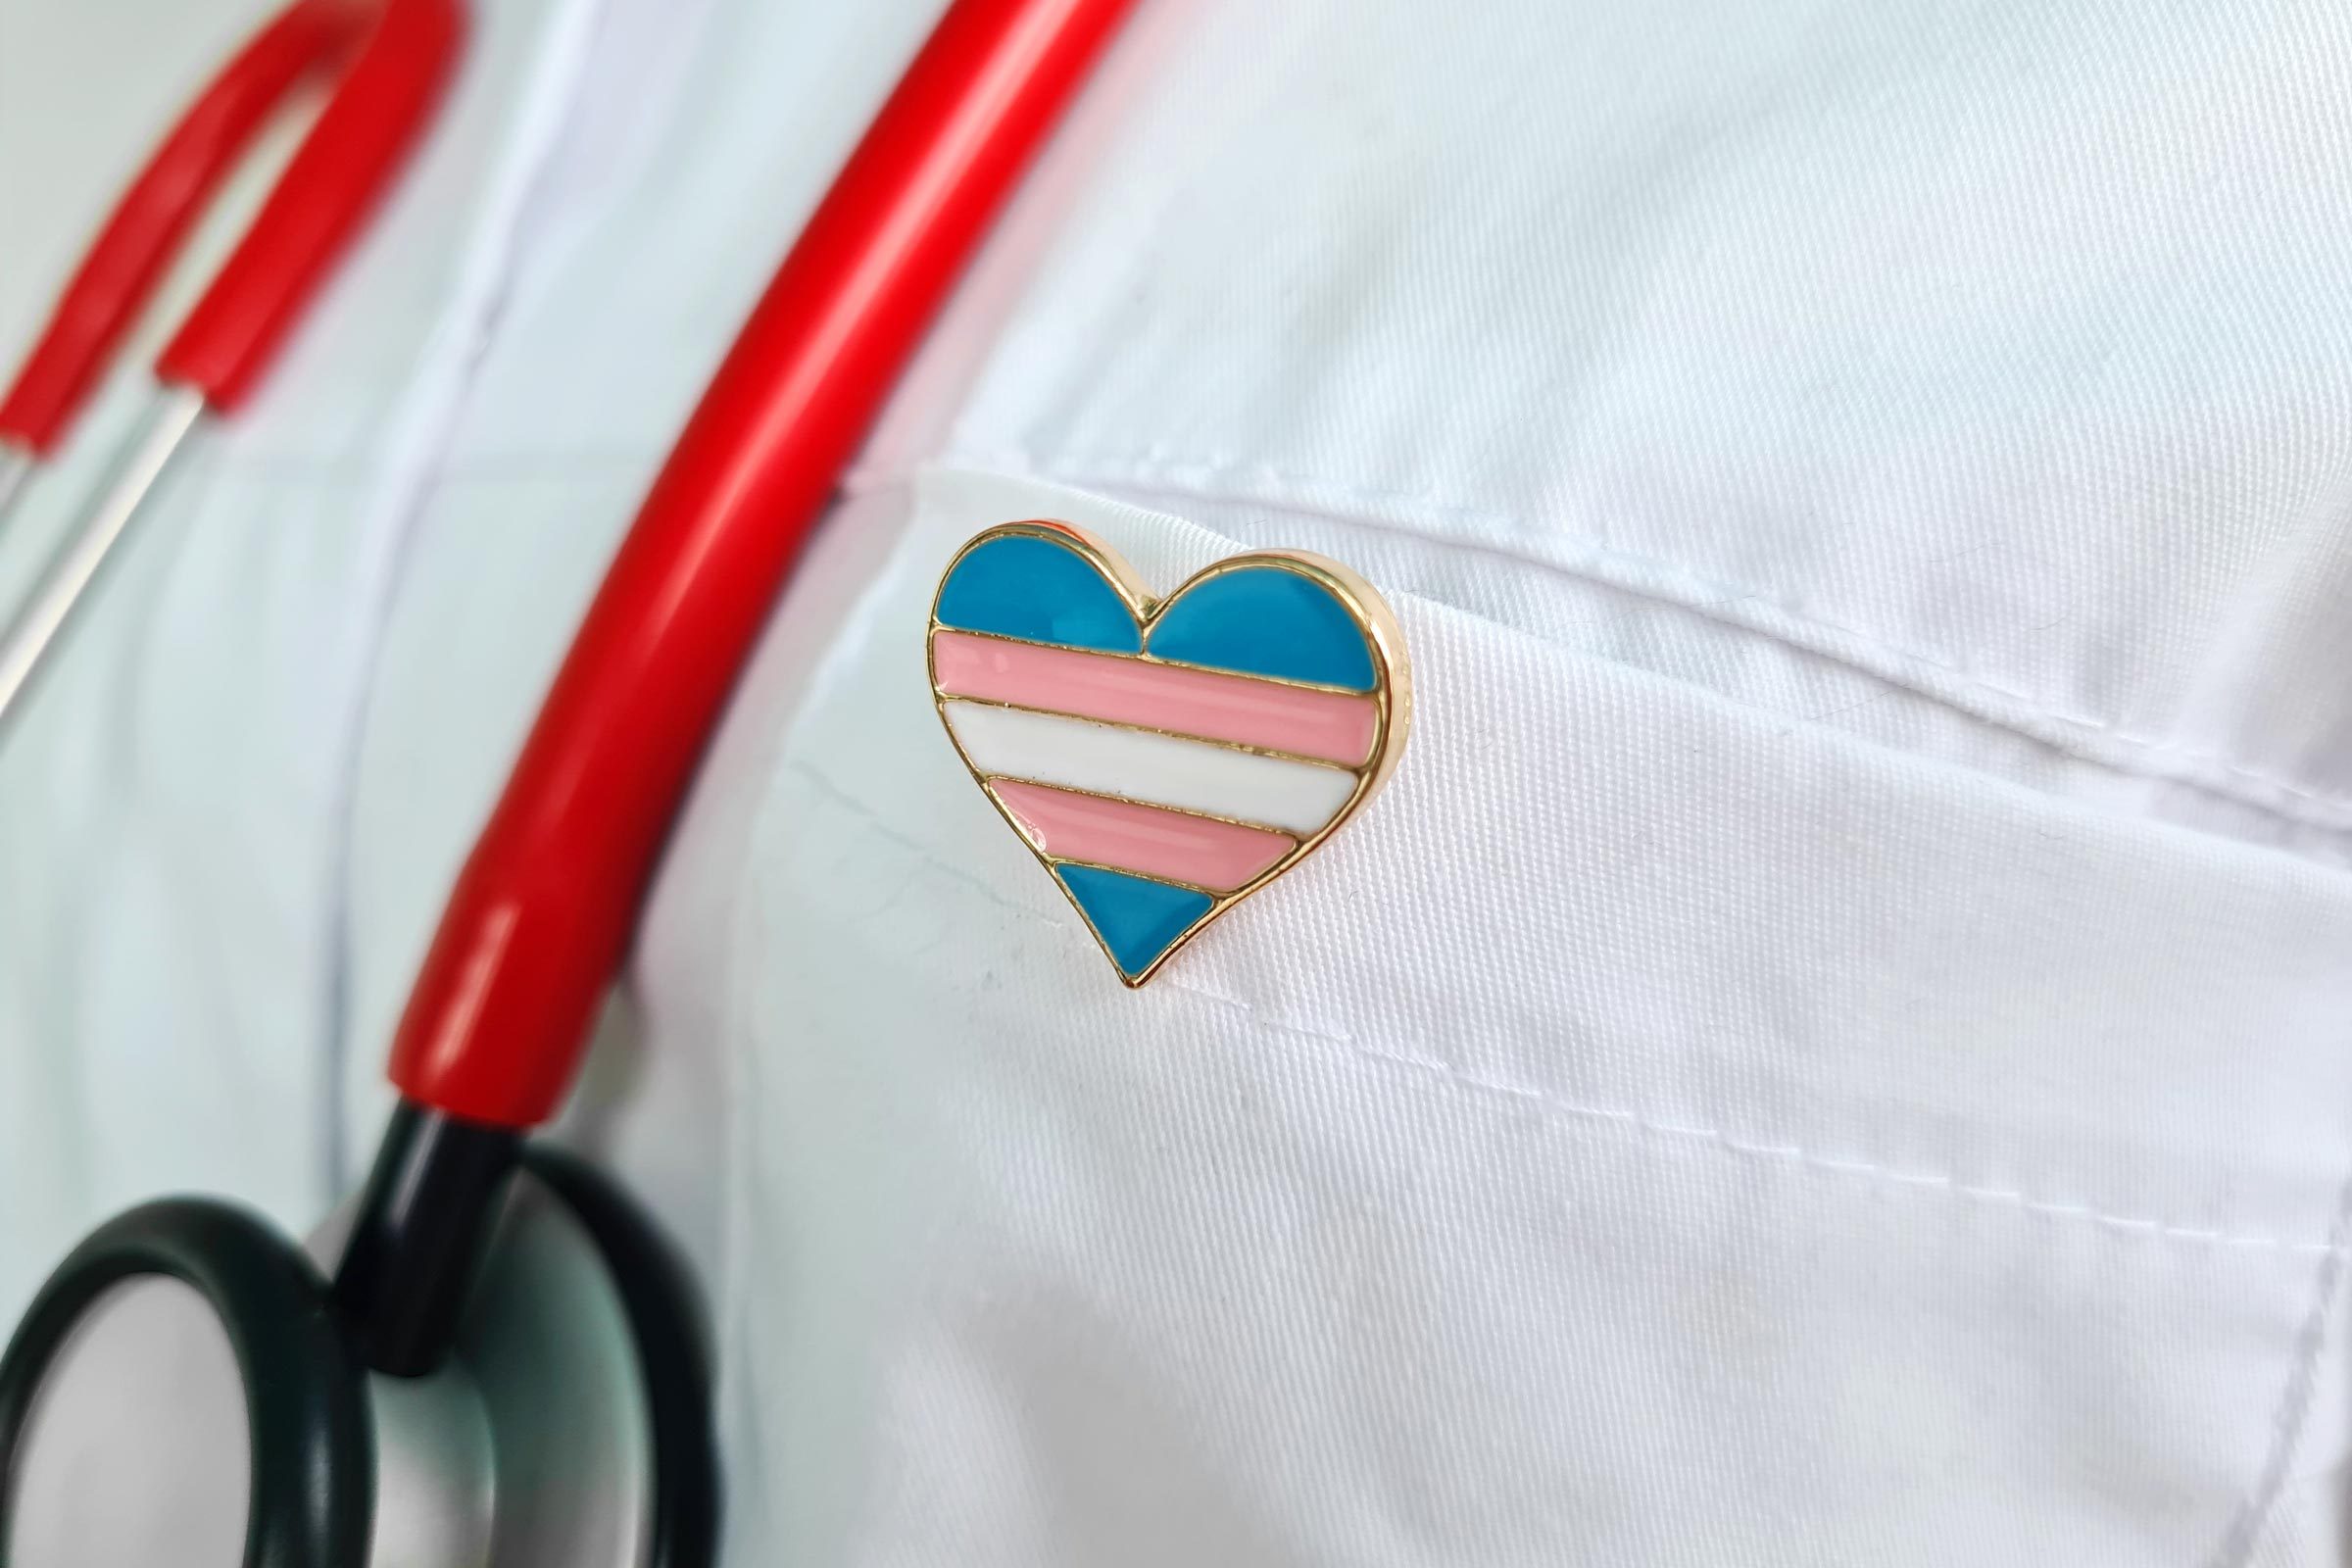 11 Questions Every Transgender Person Should Ask Their Doctor, Say Experts